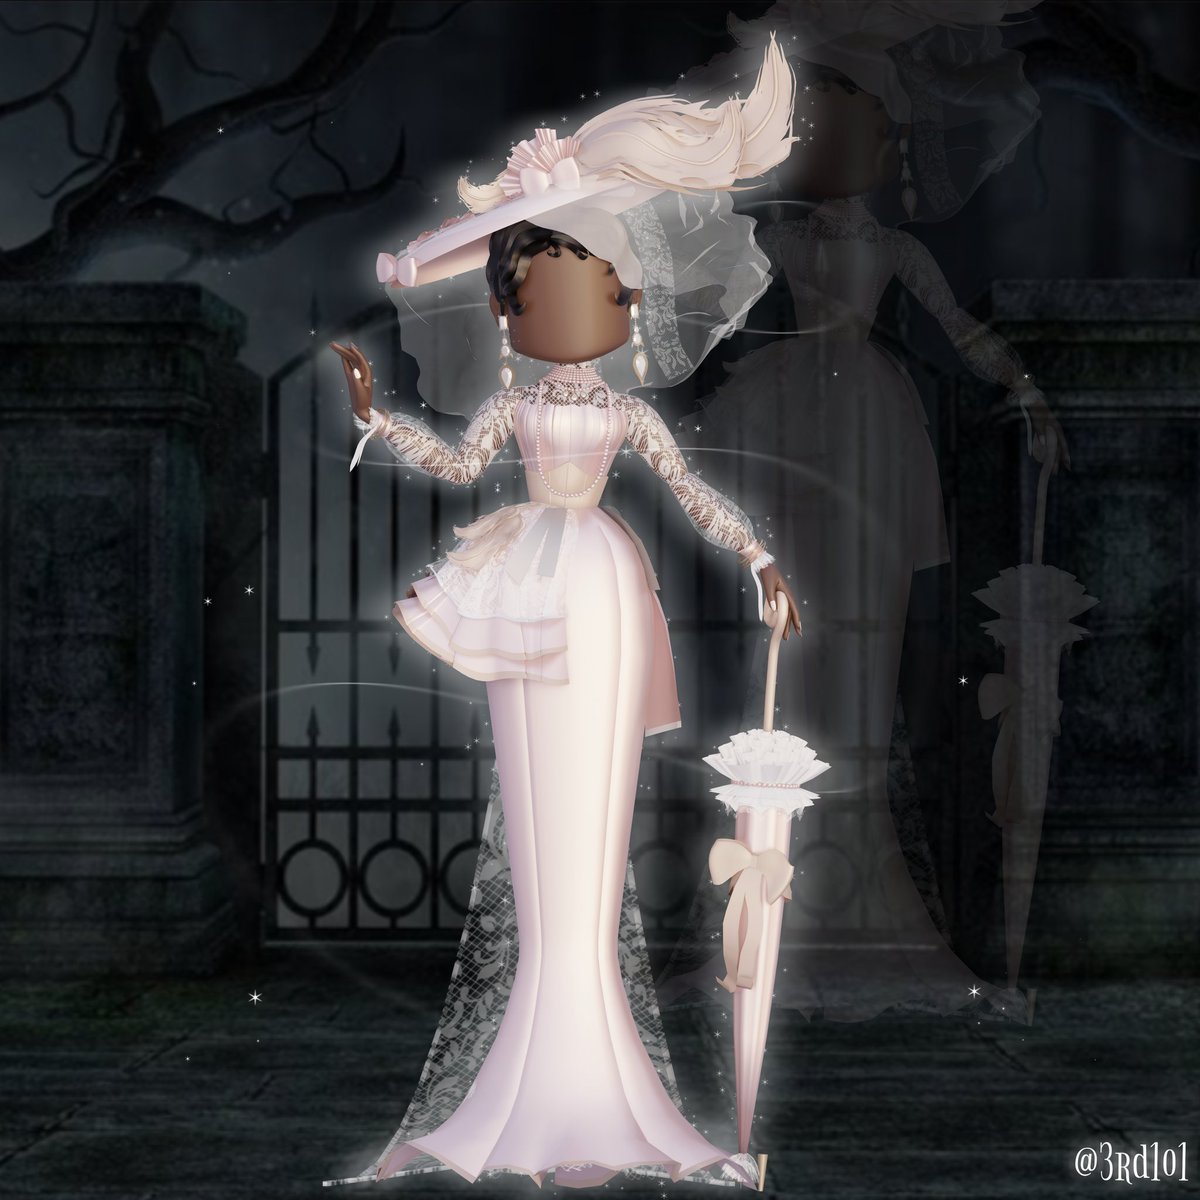 🪦🤍 PHANTASMAGORIC VIXEN🤍🪦
~-------~
👻- took 15 hours
👻- Inspired by Dior haute couture (fw2005, fw2001)
👻-concept for halloween RK2
~-------~
#RK2
#royaltykingdom2
#fashiongame
#roblox
#robloxdev
#robloxart